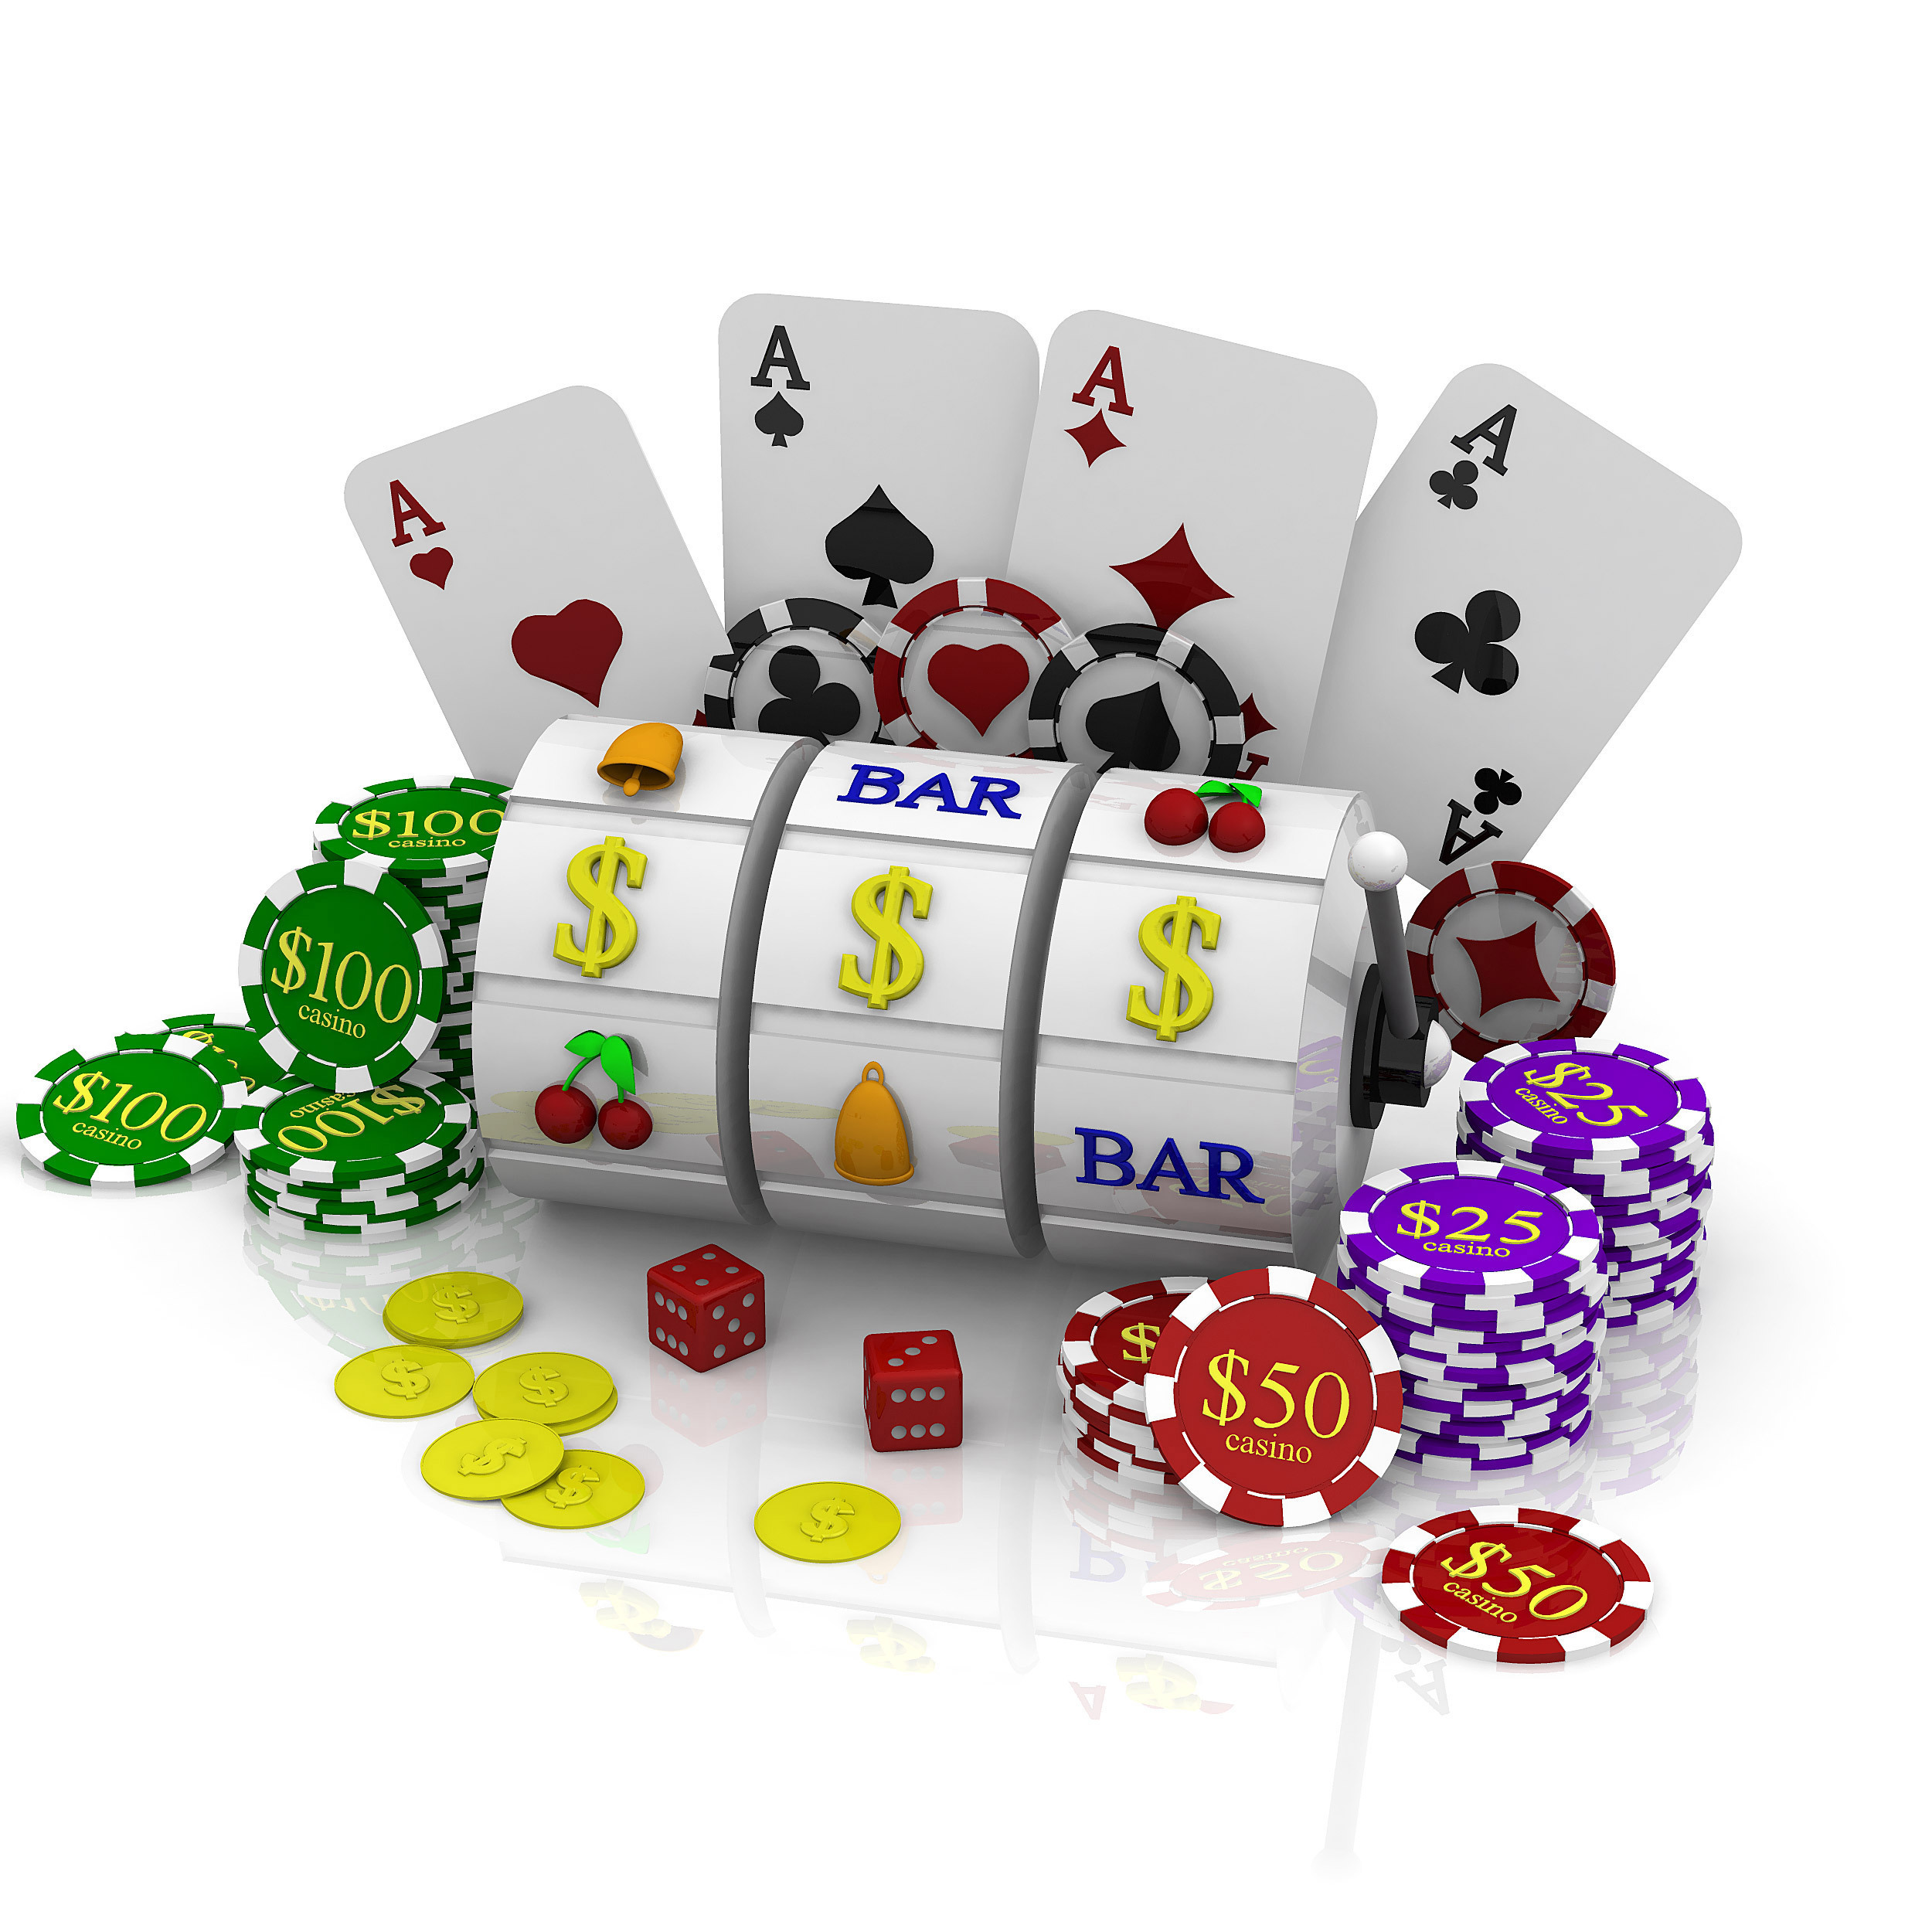 gambling site online casino real money real lottery for real money